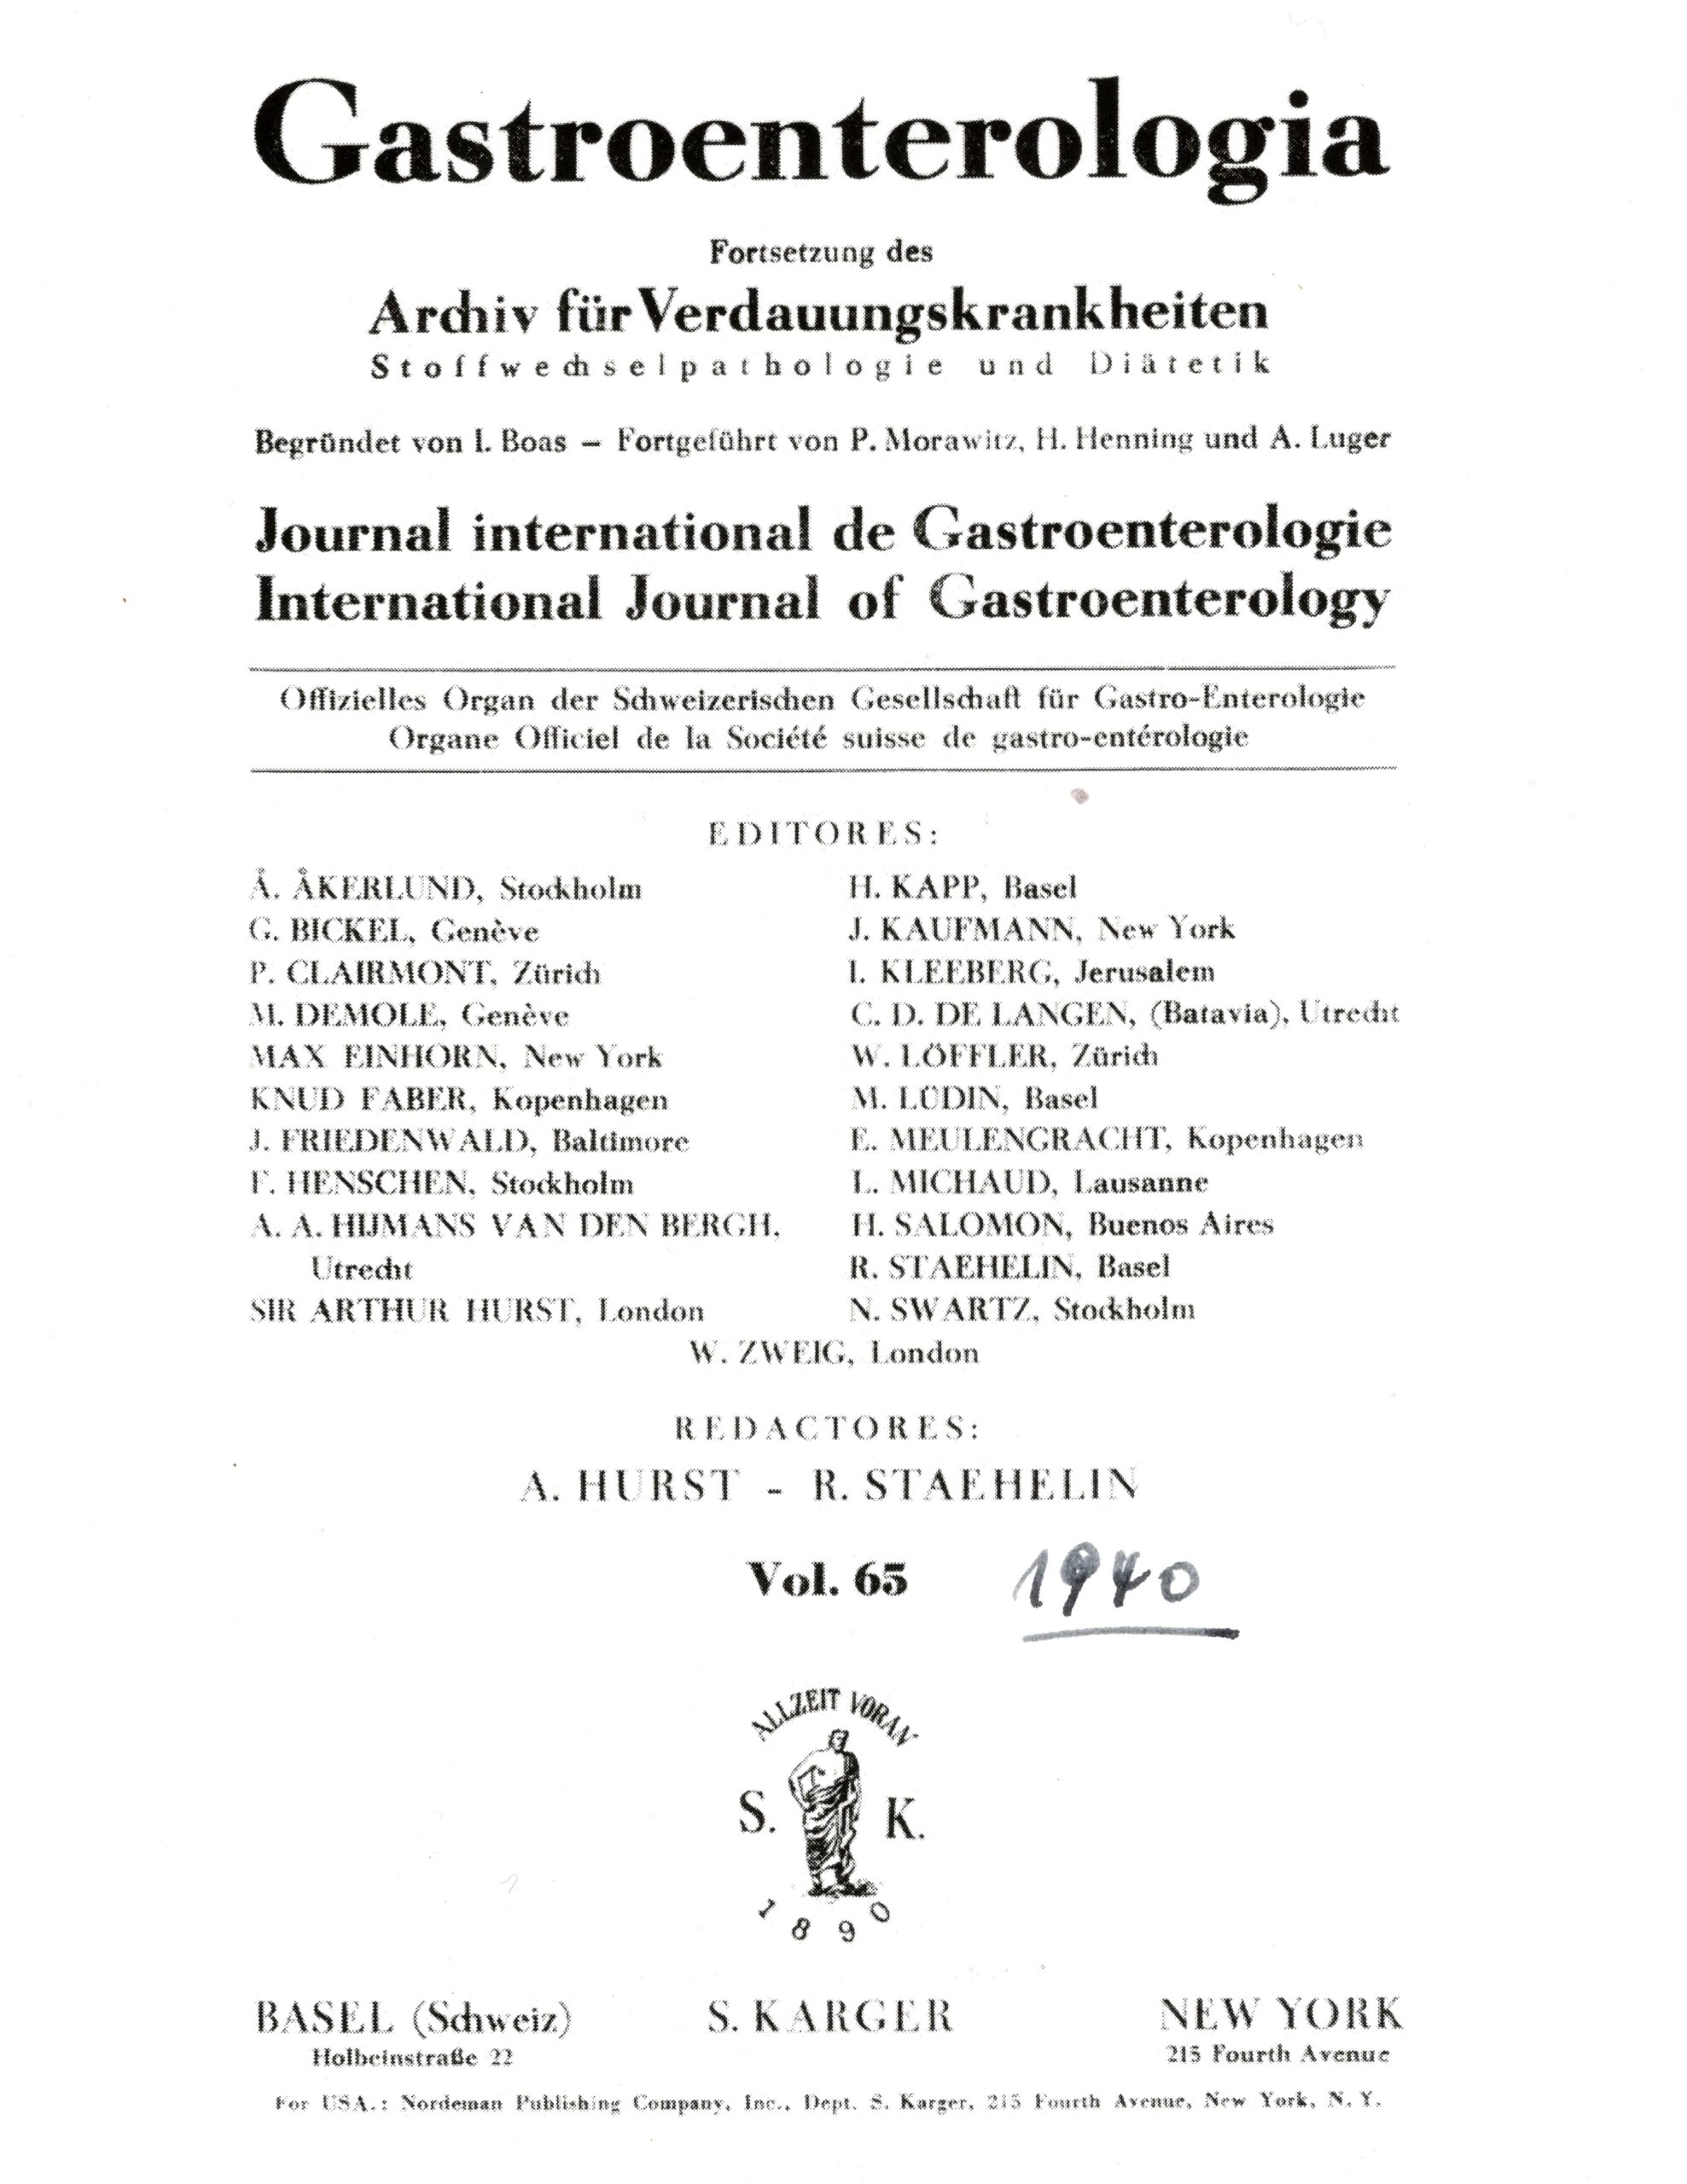 Co-editor of the successor journal of the 